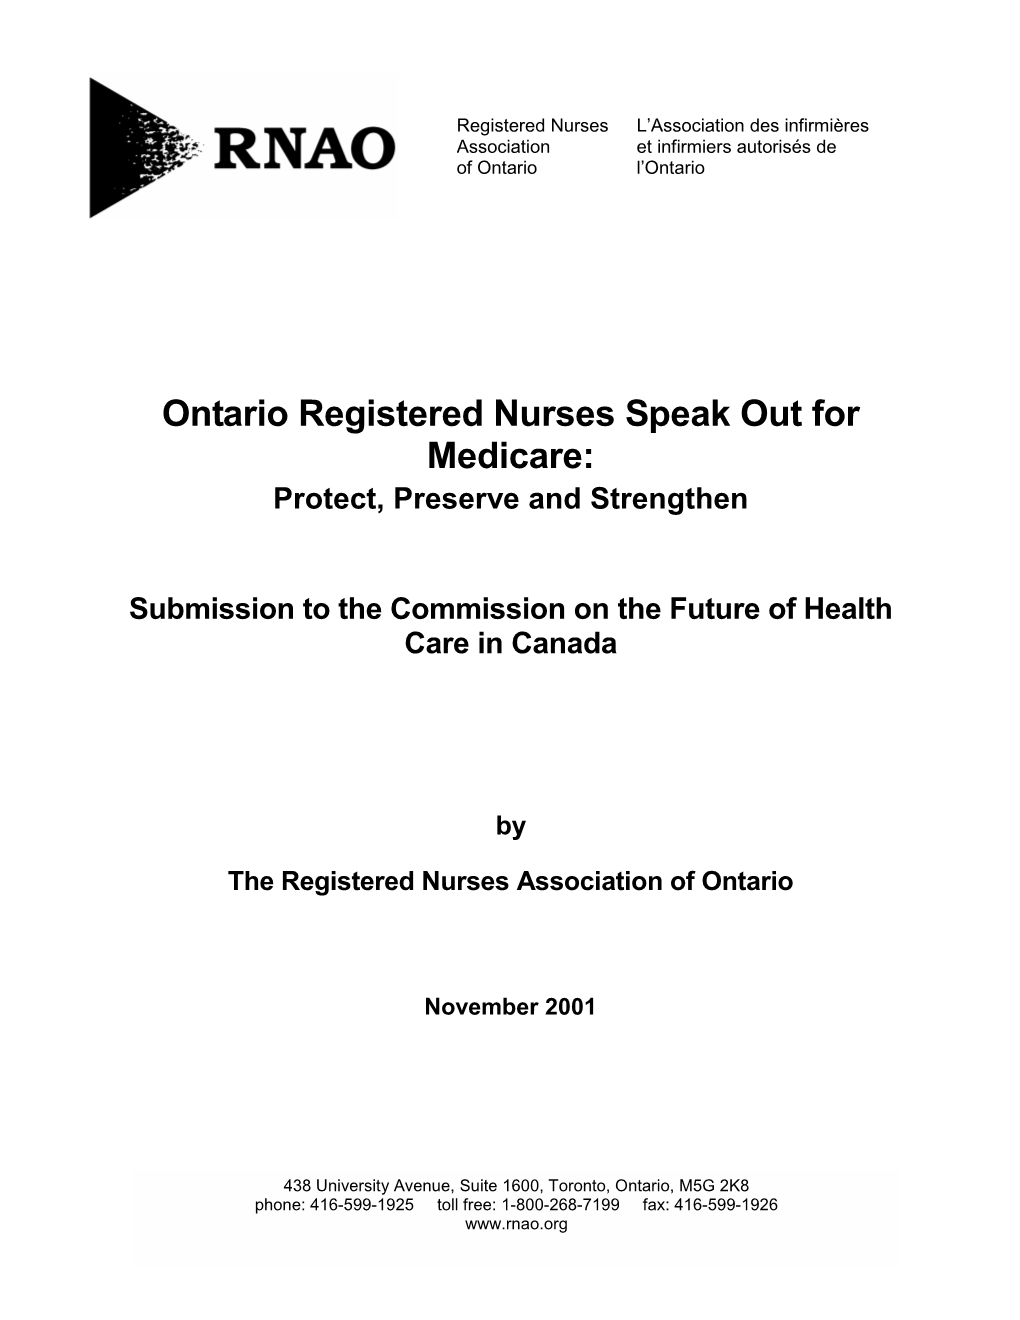 Ontario Registered Nurses Speak out for Medicare: Protect, Preserve and Strengthen